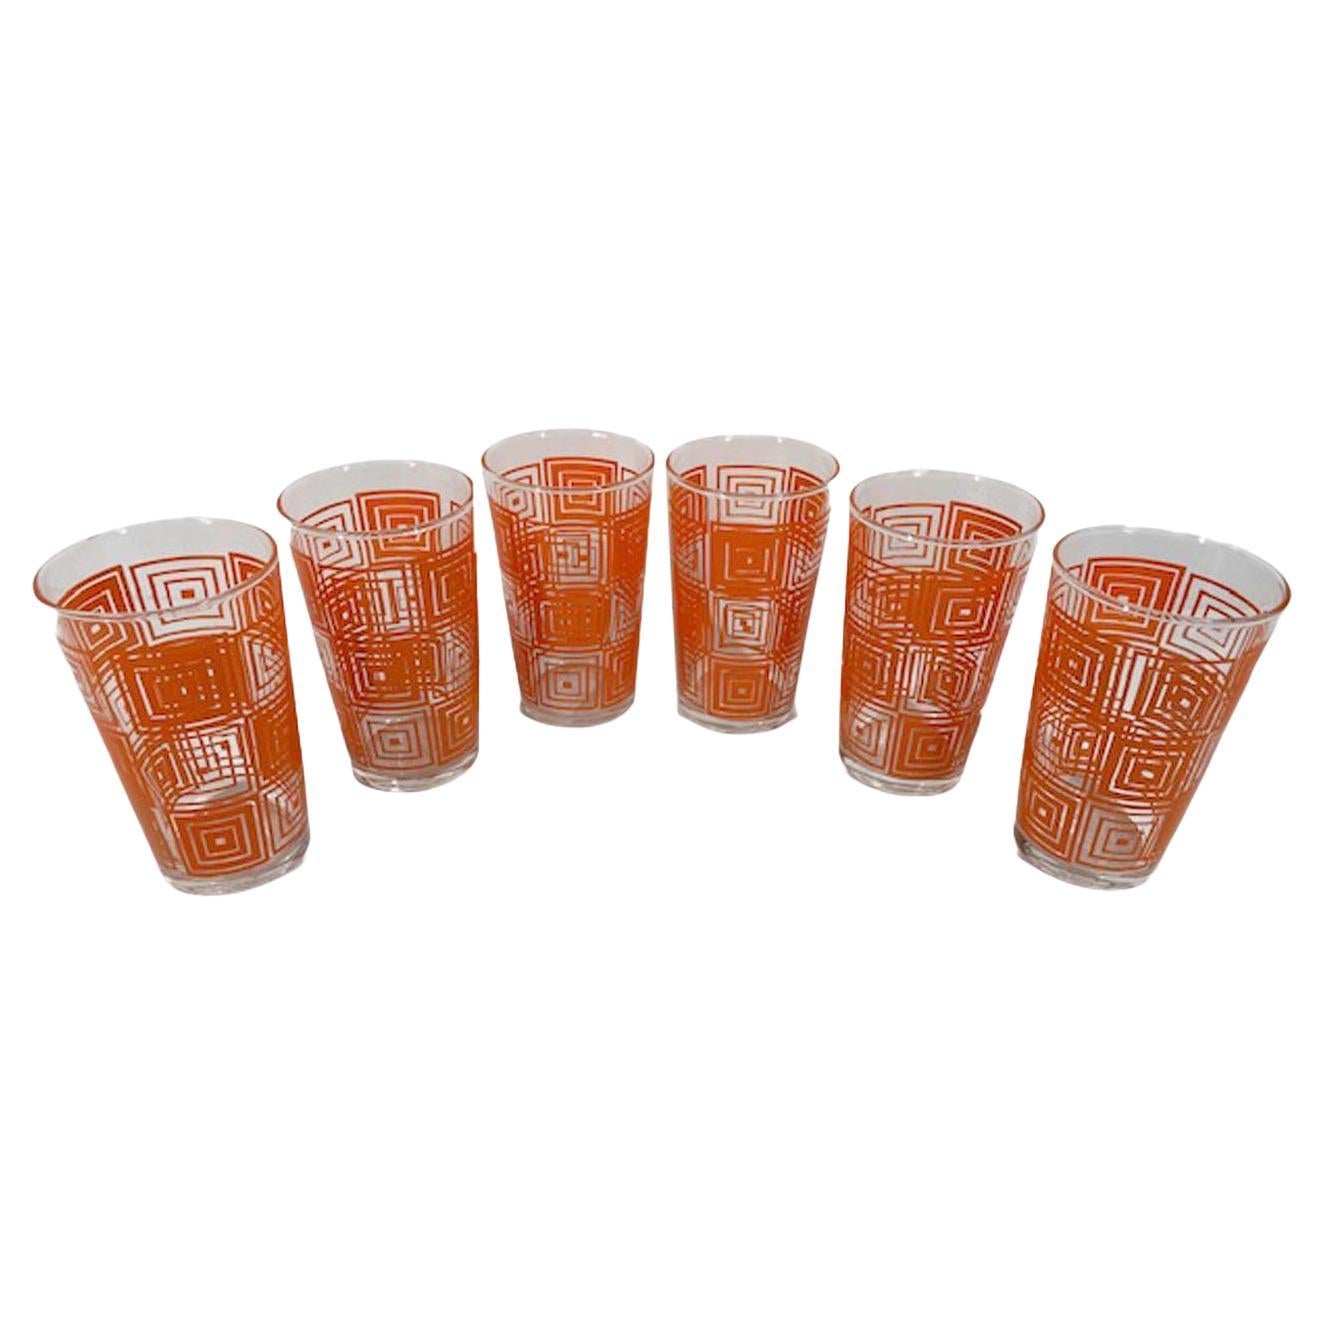 Six Vintage Federal Glassware Tumblers with Concentric Squares in Orange Enamel